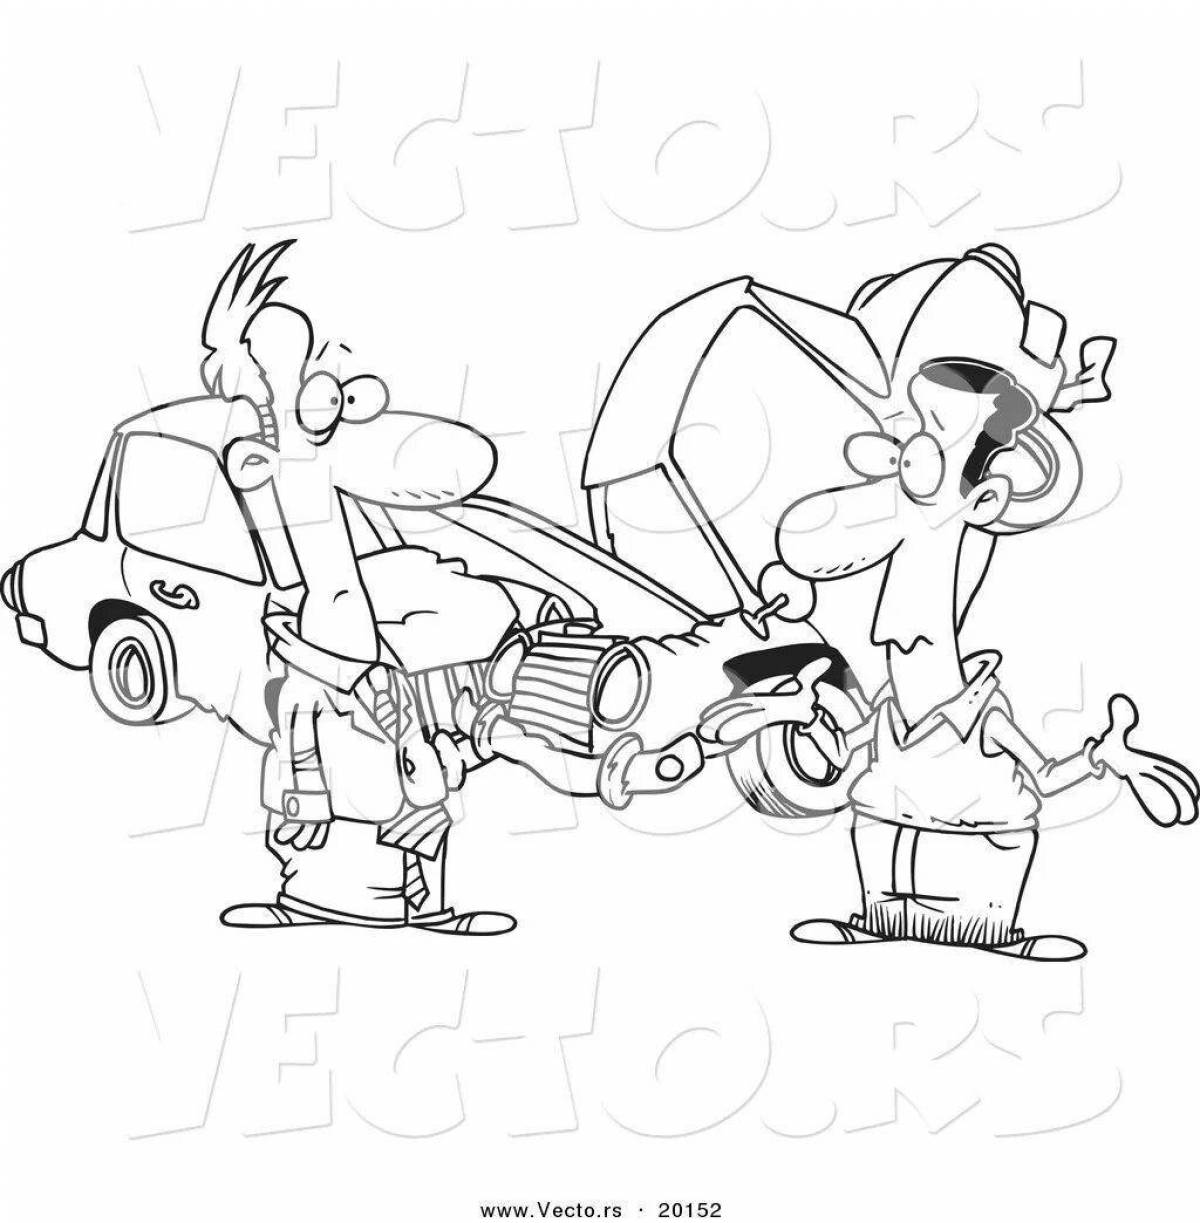 Awesome crash test coloring page